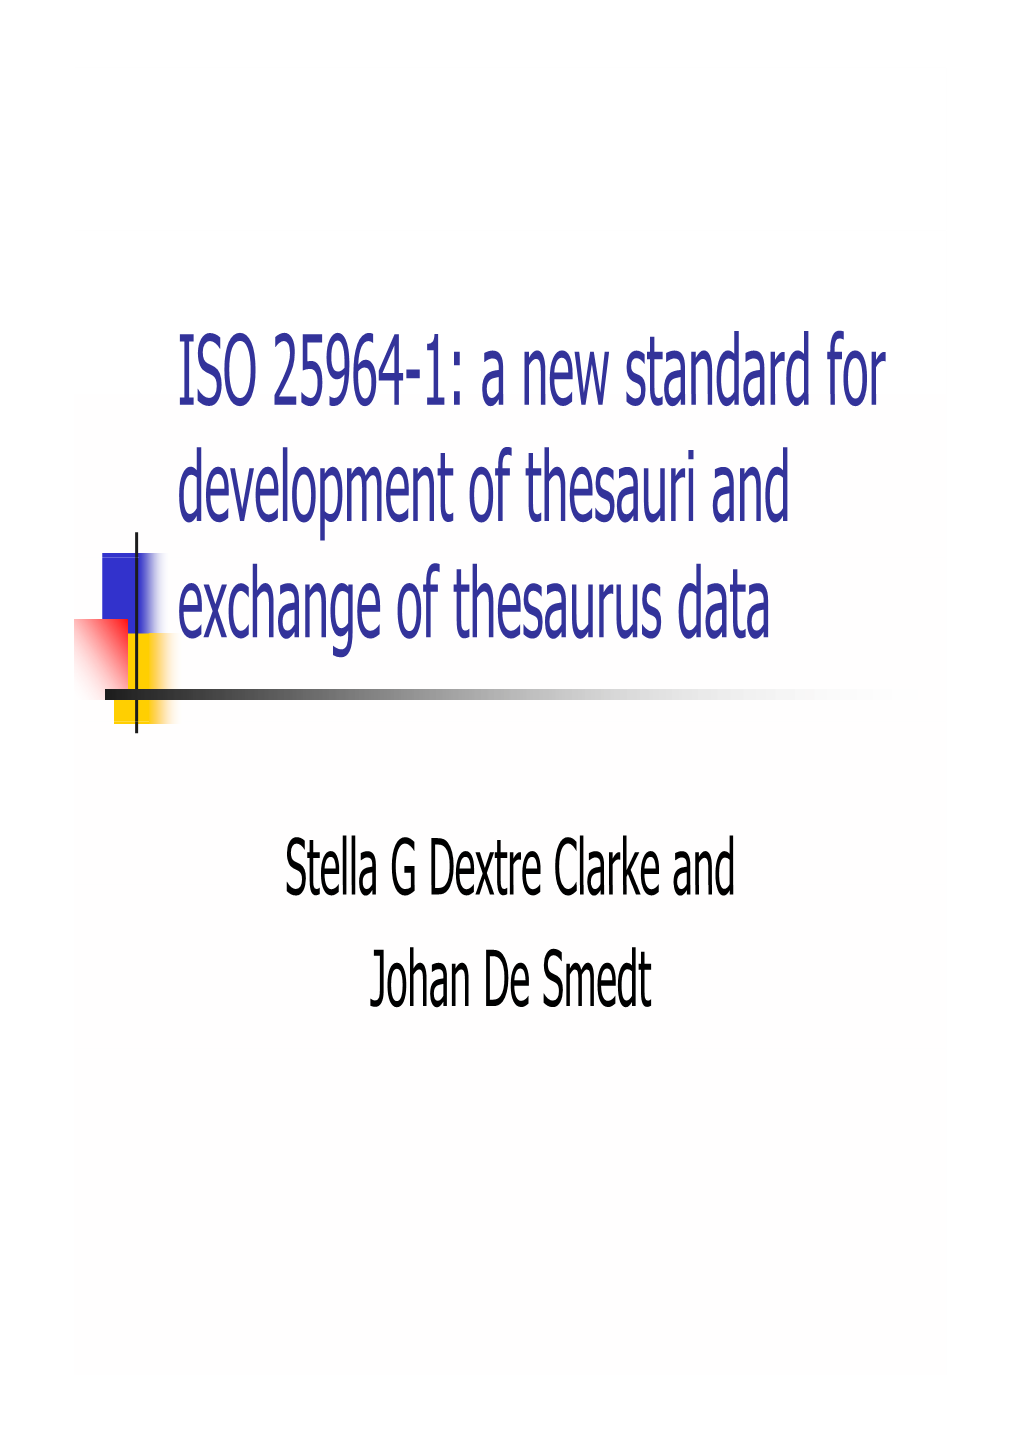 ISO 25964-1: a New Standard for Development of Thesauri and Exchange of Thesaurus Data